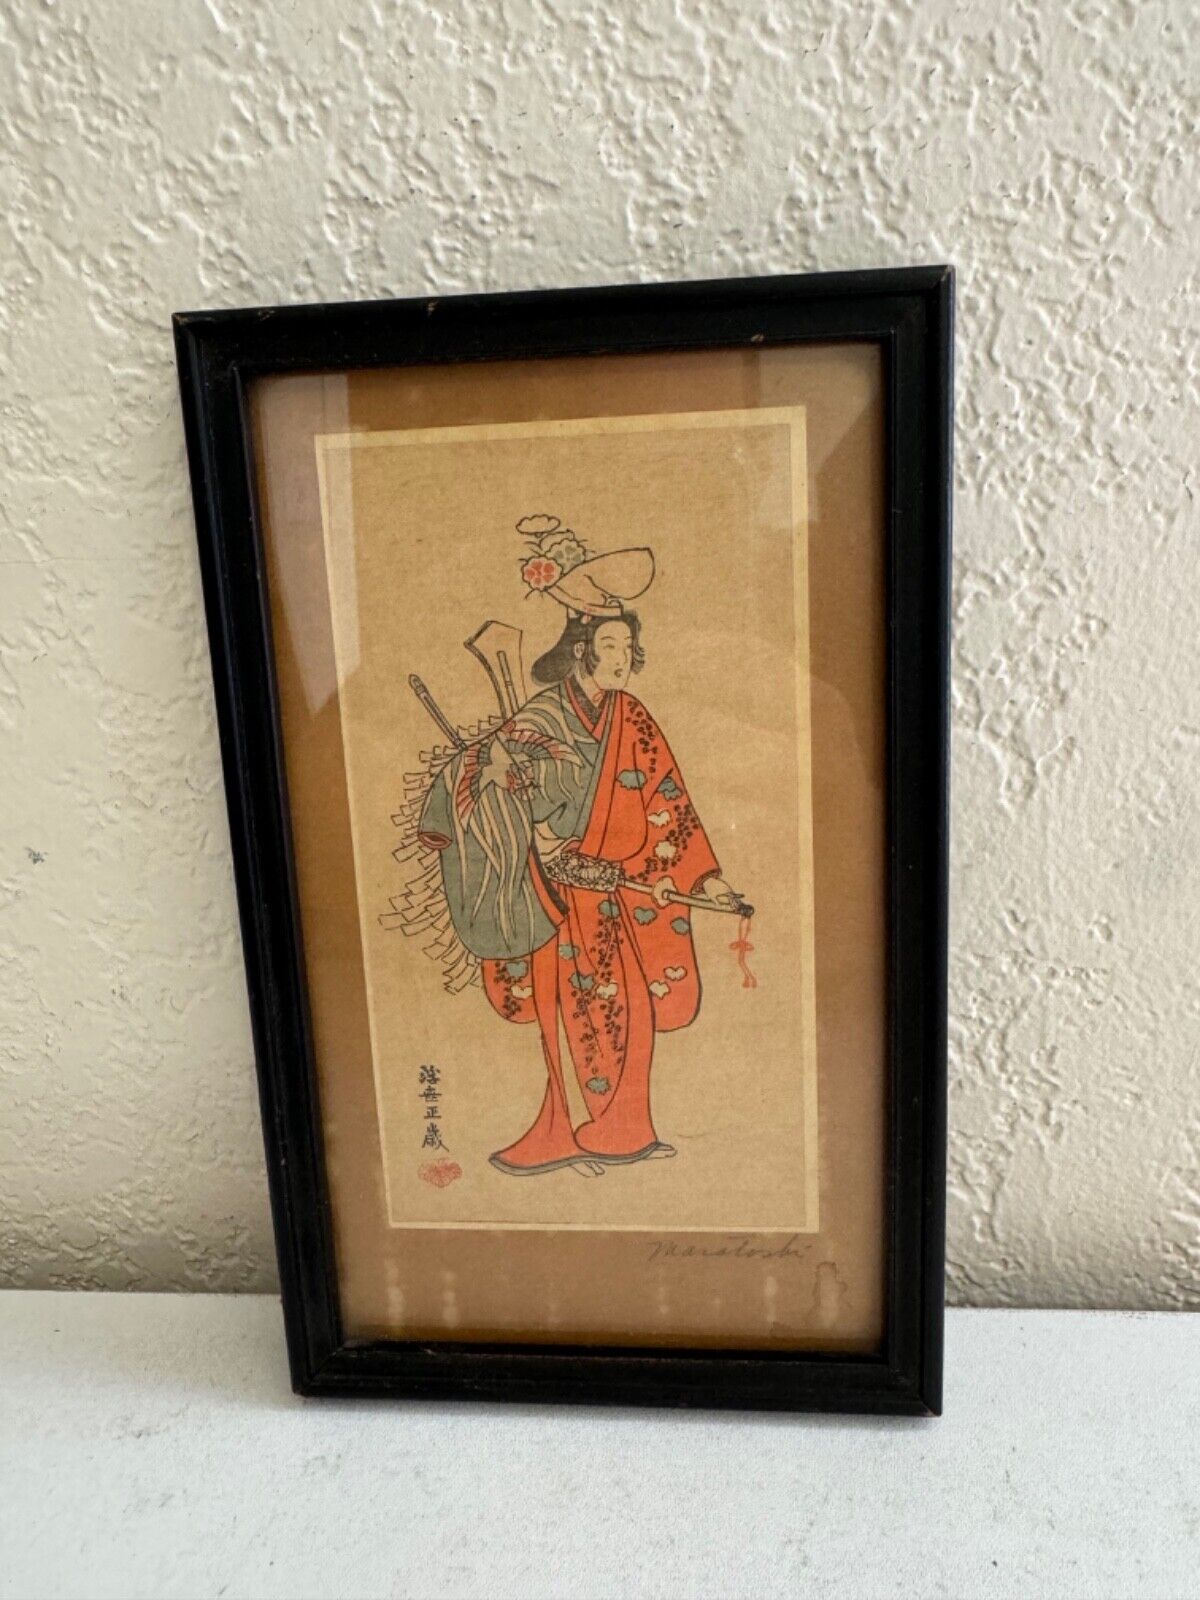 Vtg Antique Japanese Small Woodblock Print of Figure w/ Sword Signed Makatoshi